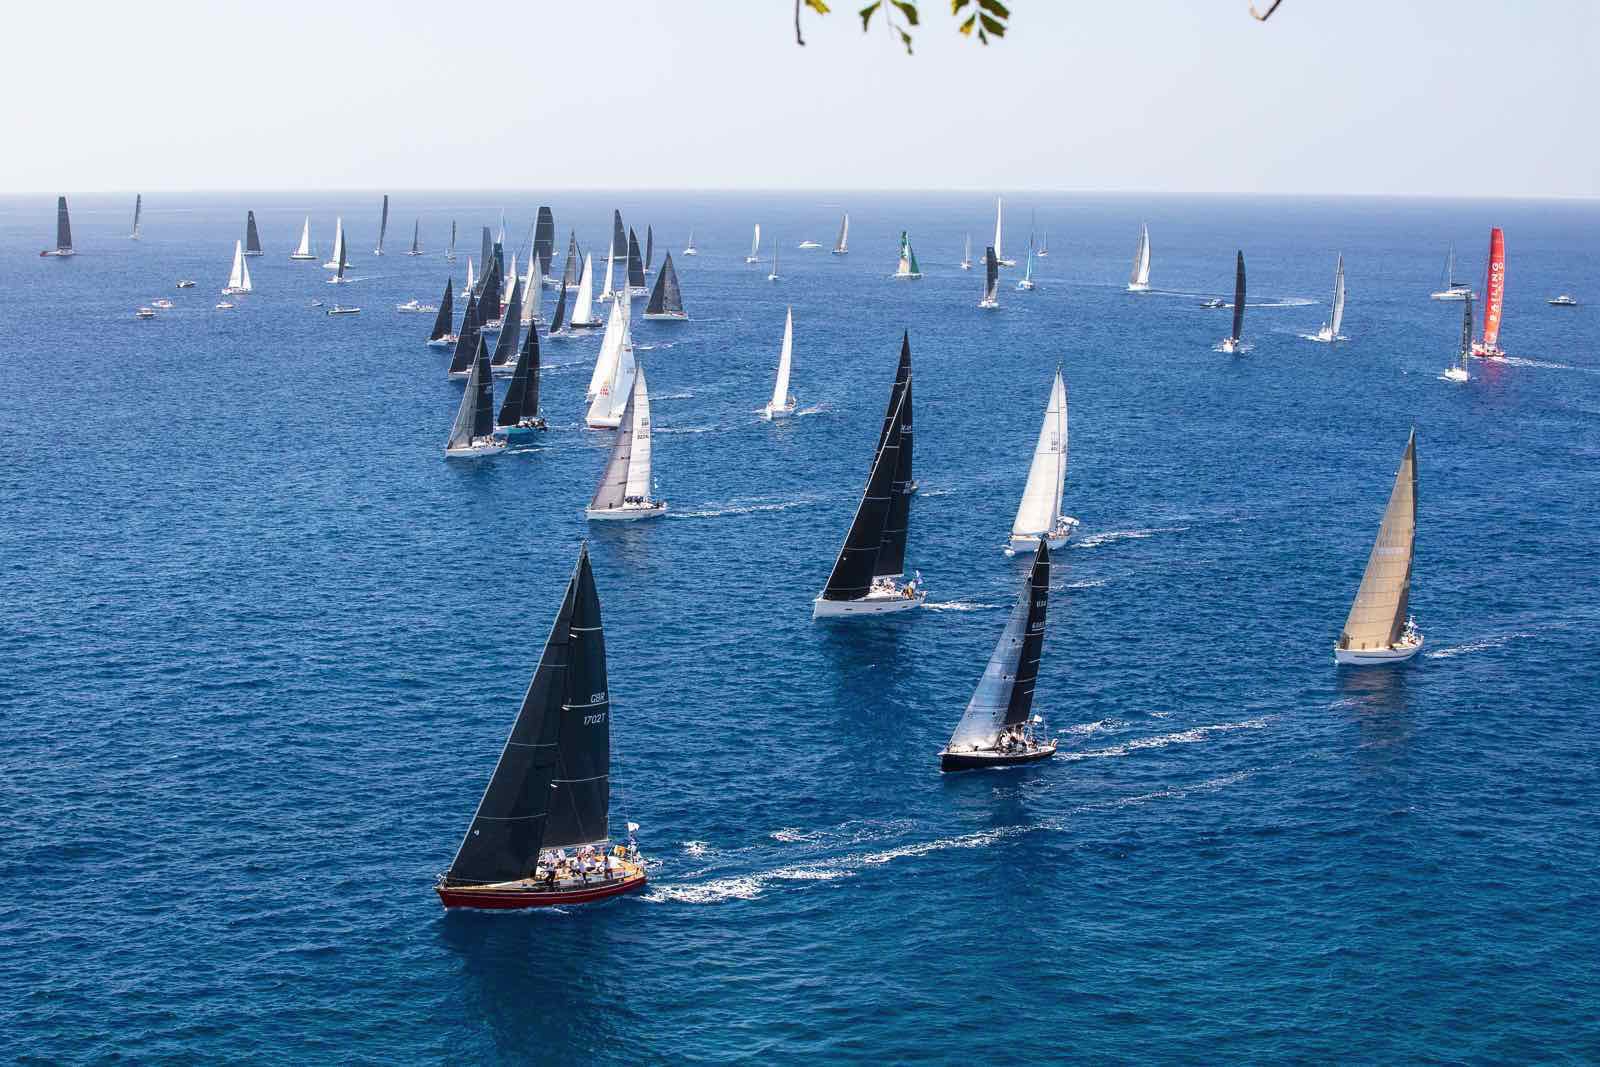  IRC  RORC Carribbean 600  English Harbour ANT  Day 1, 76 boat fleet underway